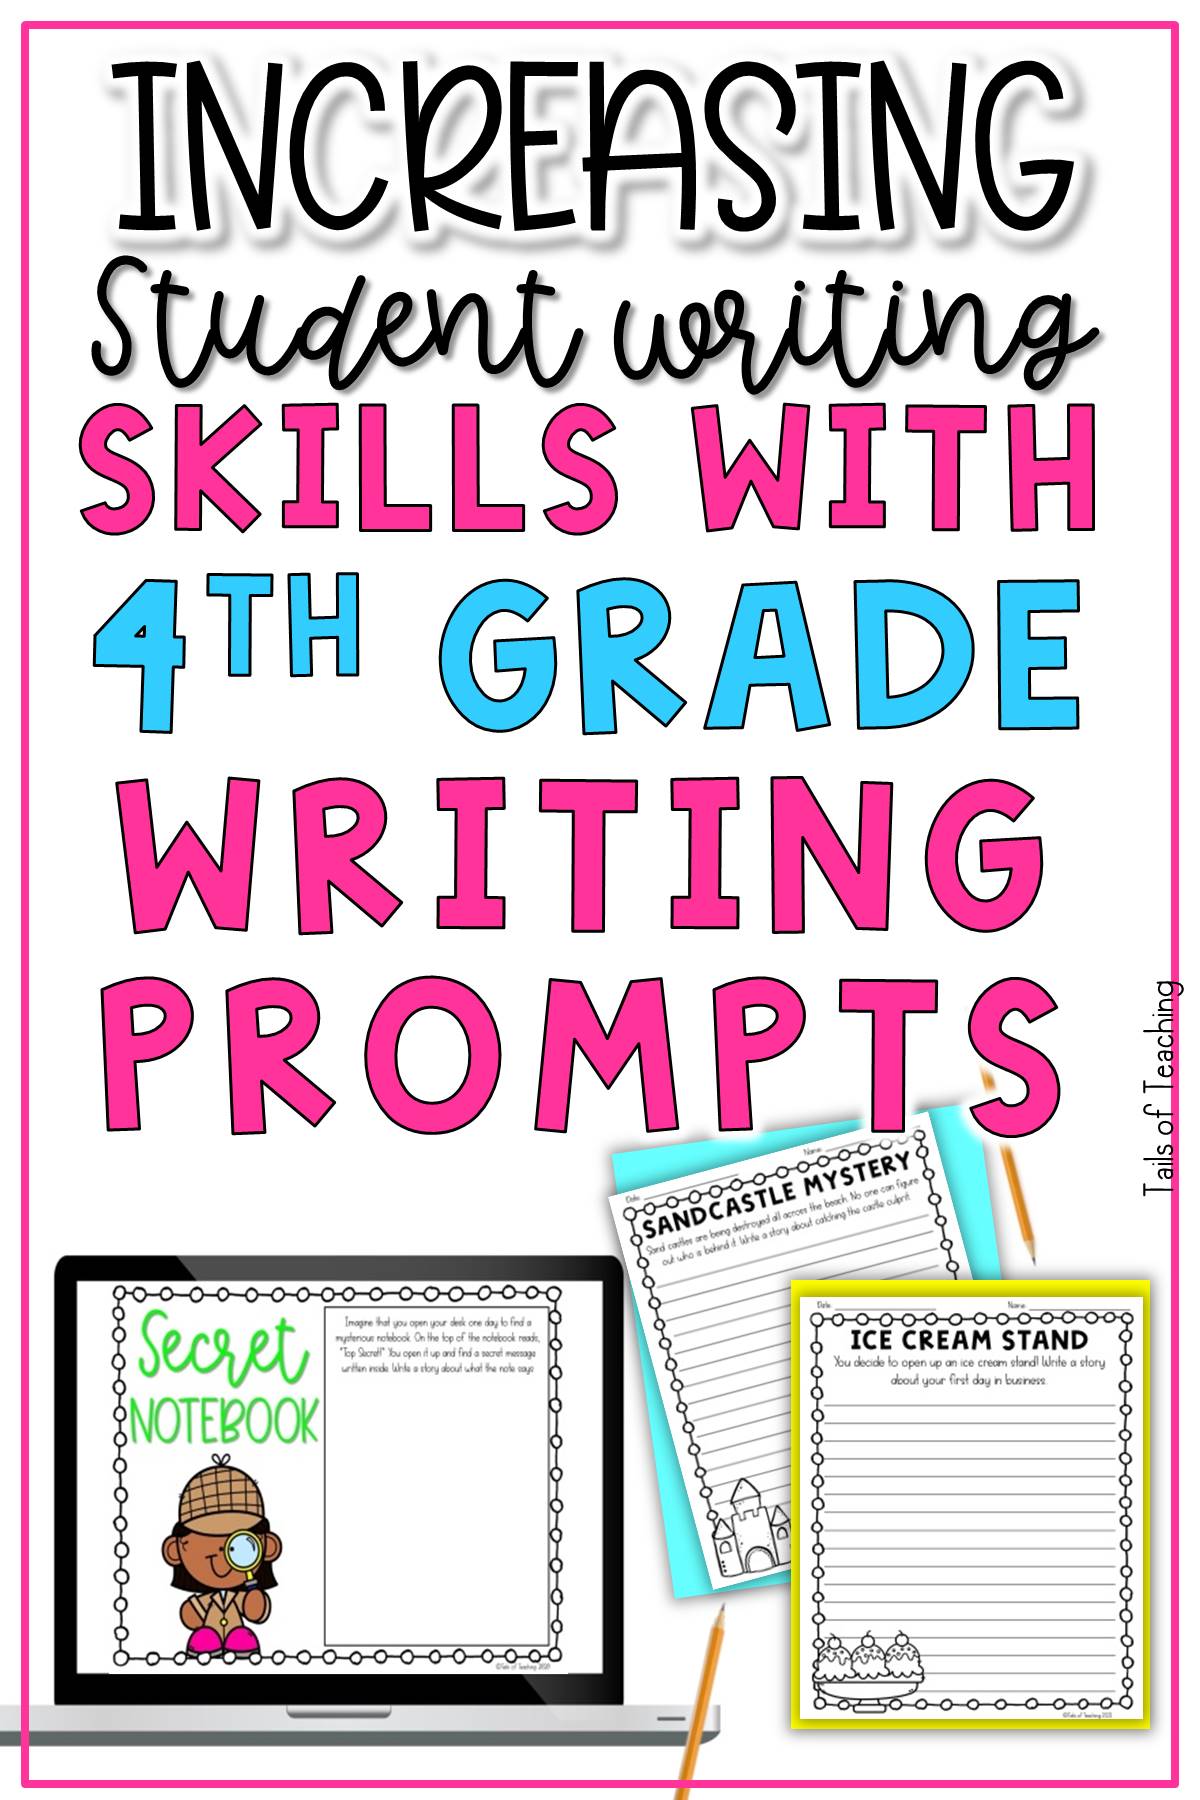 4th grade writing prompts sel